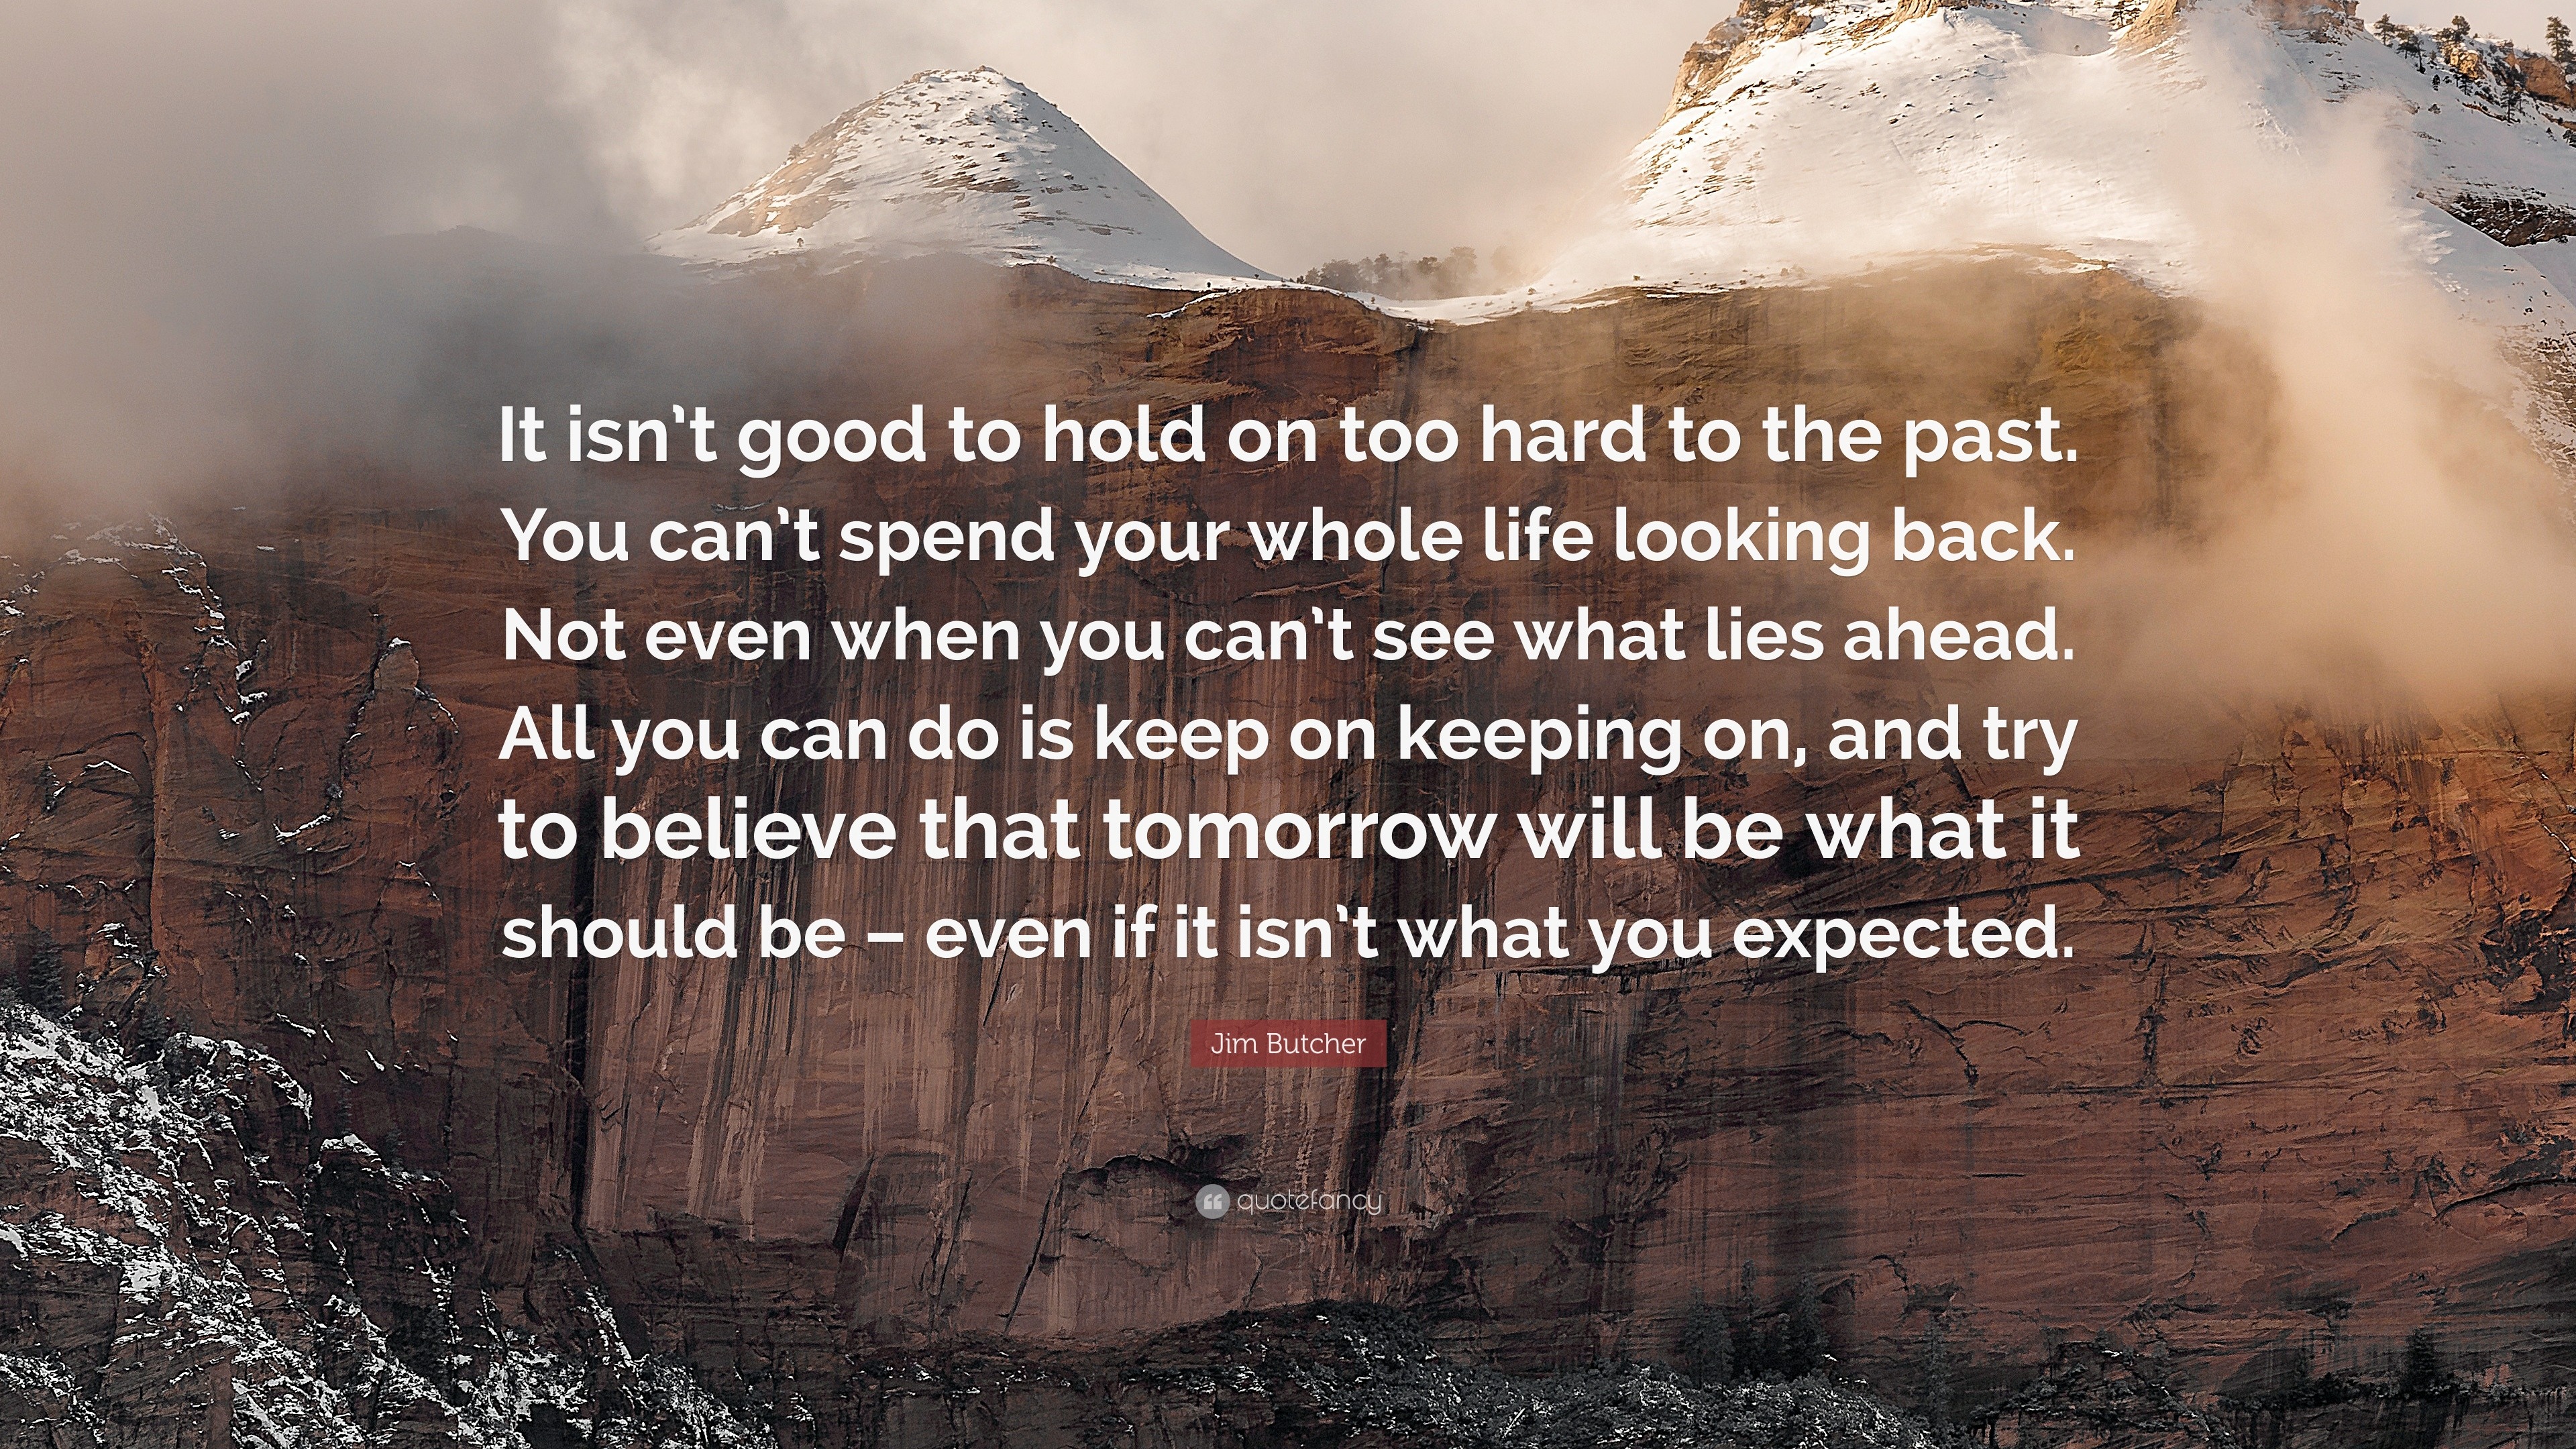 Jim Butcher Quote: “It isn’t good to hold on too hard to the past. You ...